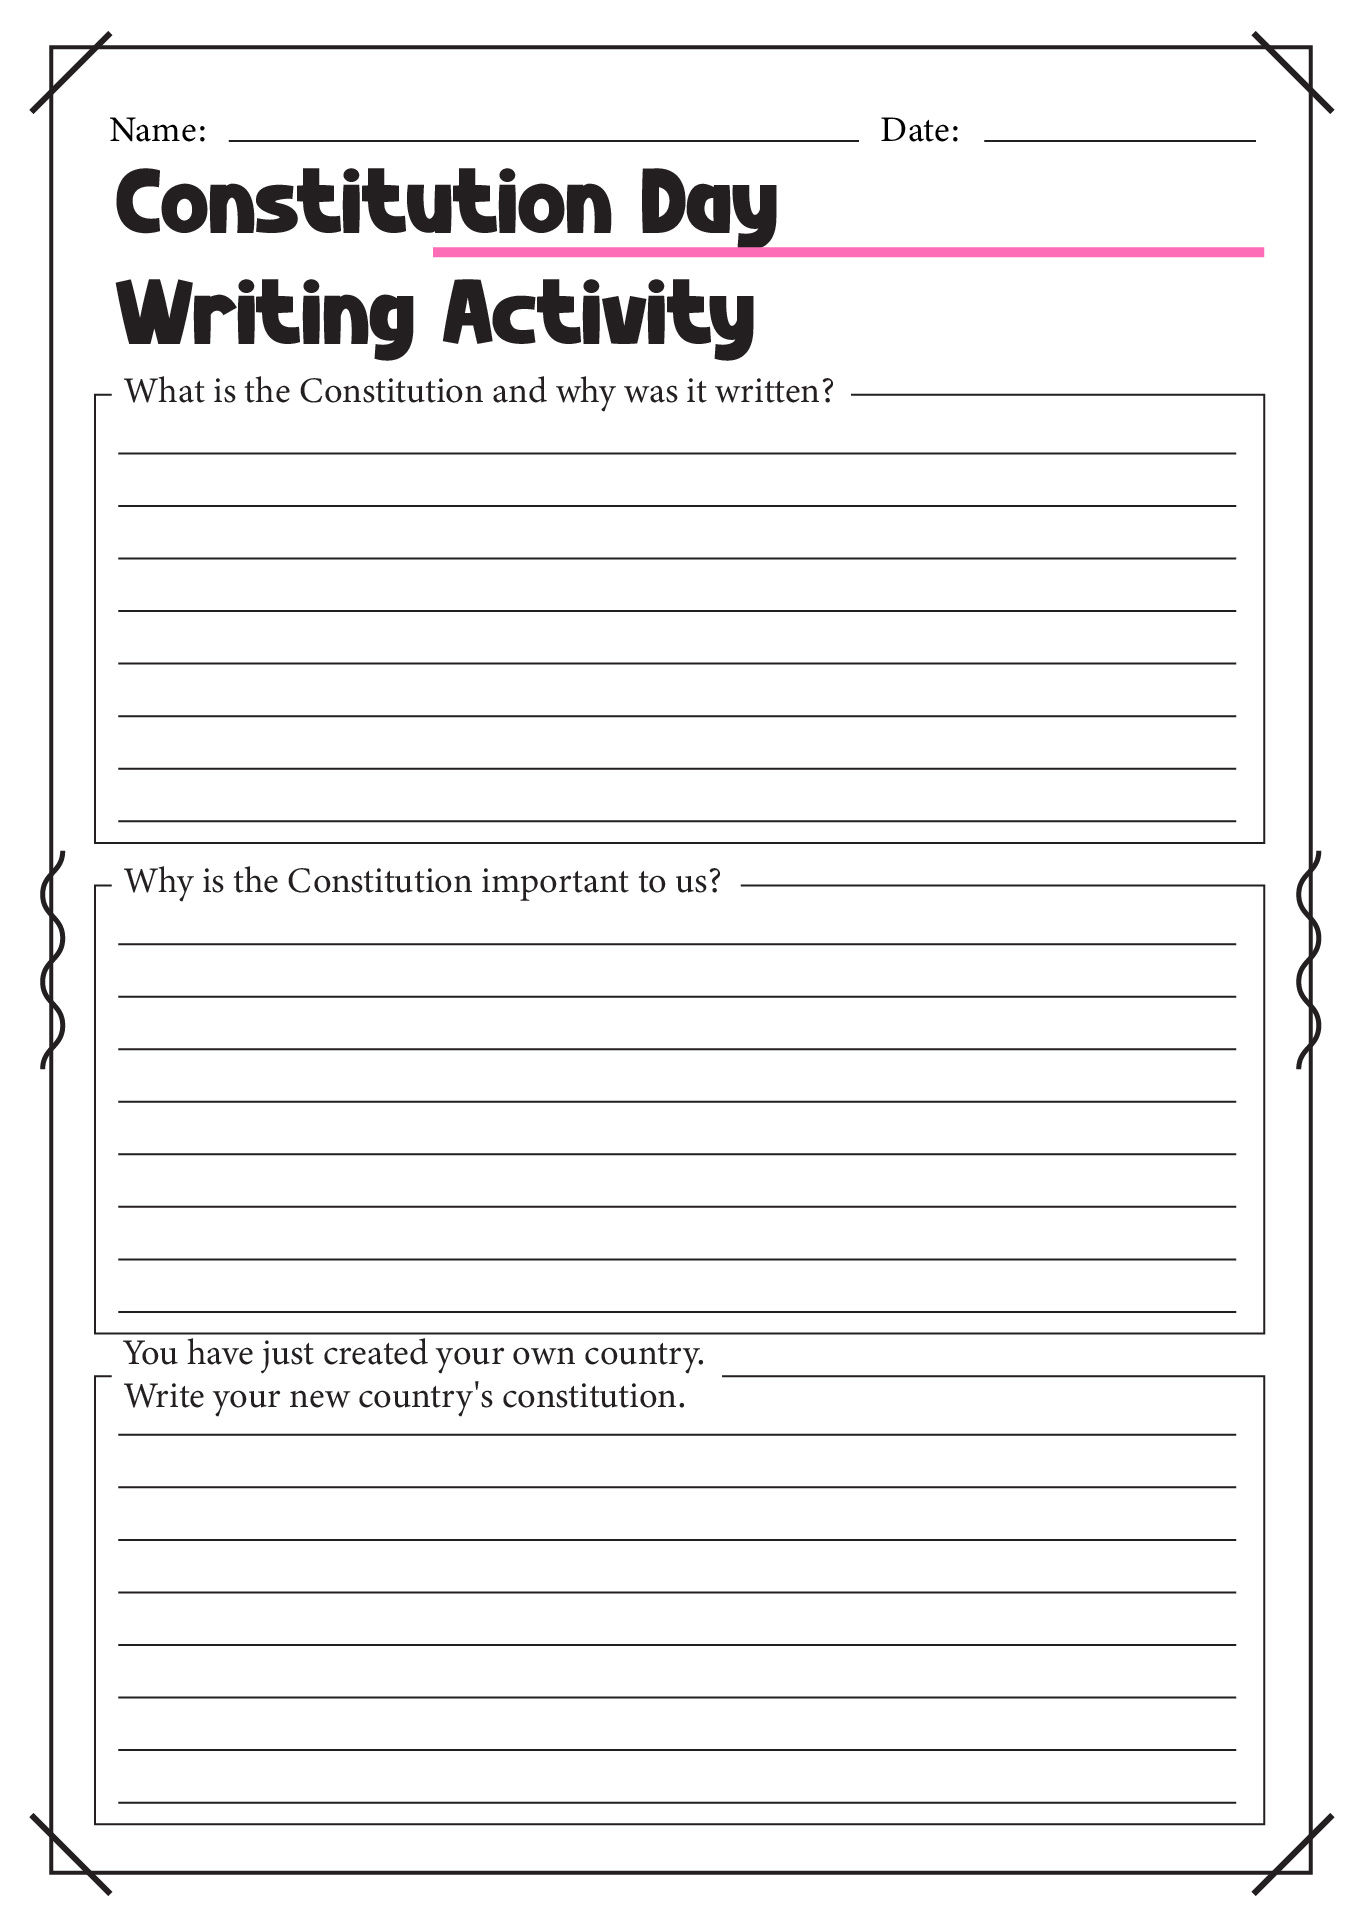 Constitution Day Writing Activity Image